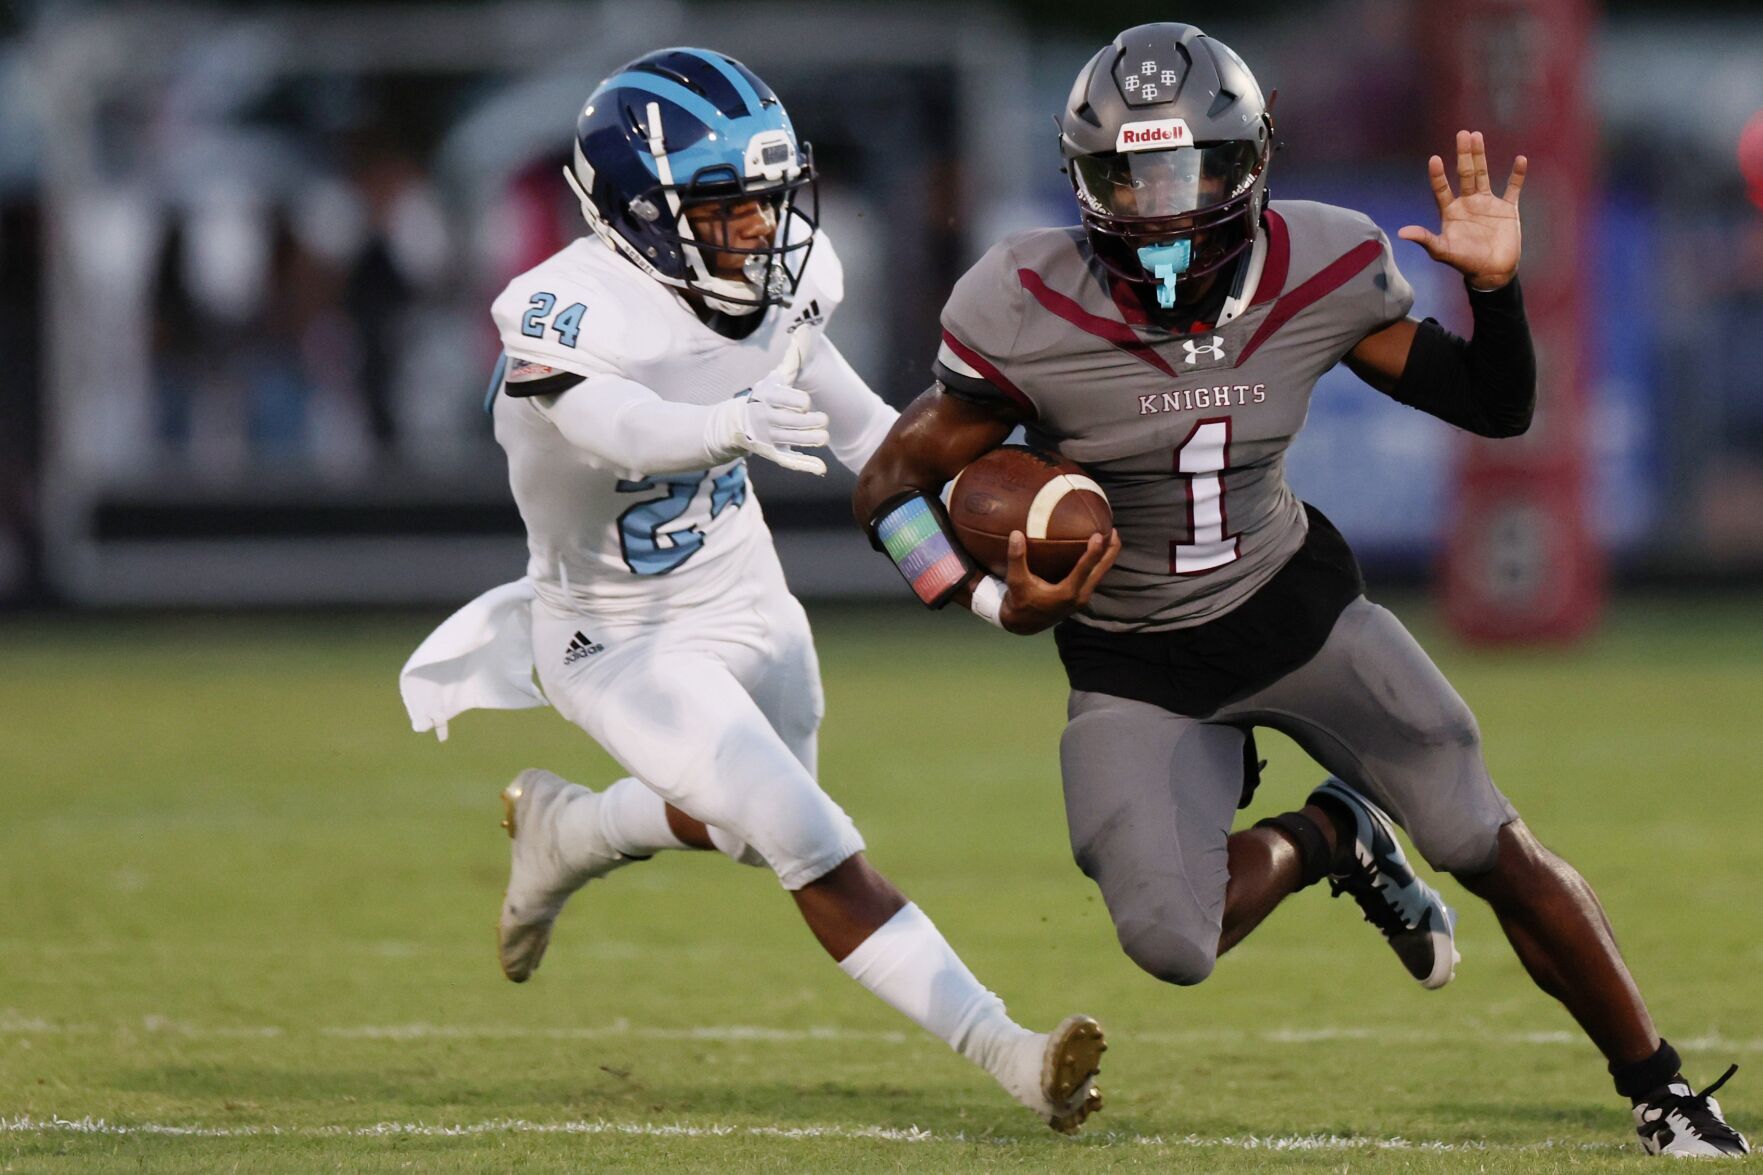 No. 4 Thomas Dale Tops No. 3 Dinwiddie in Thrilling Game